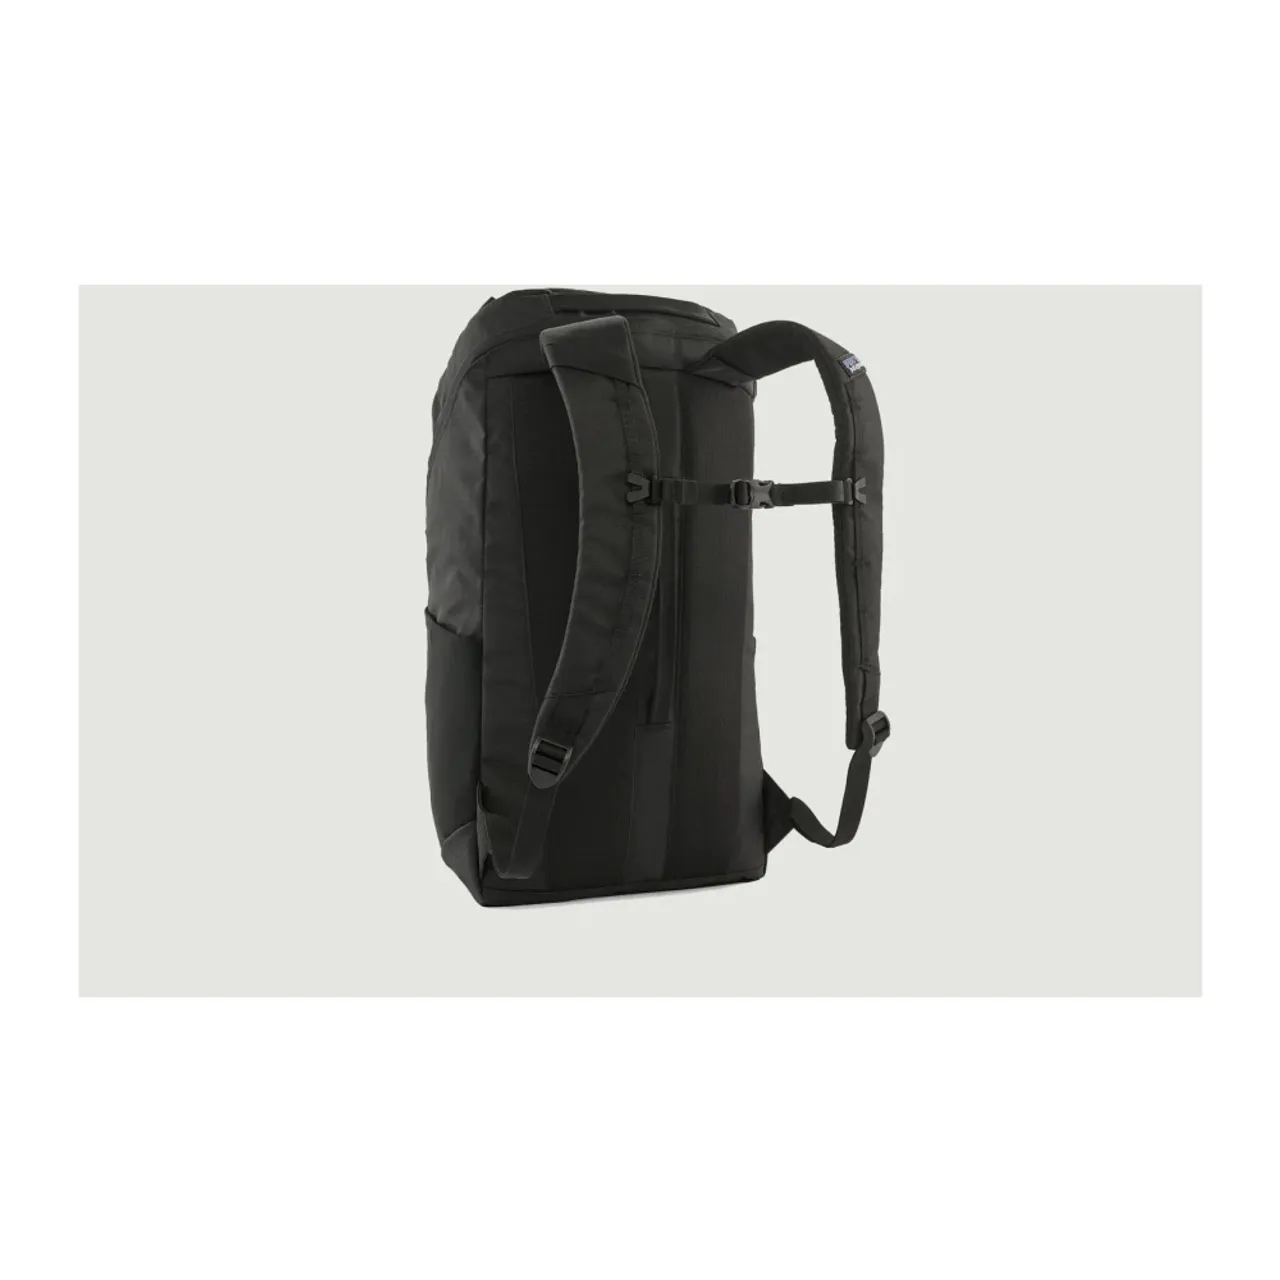 Patagonia , Black Hole Pack 25L backpack ,Black male, Sizes: ONE SIZE